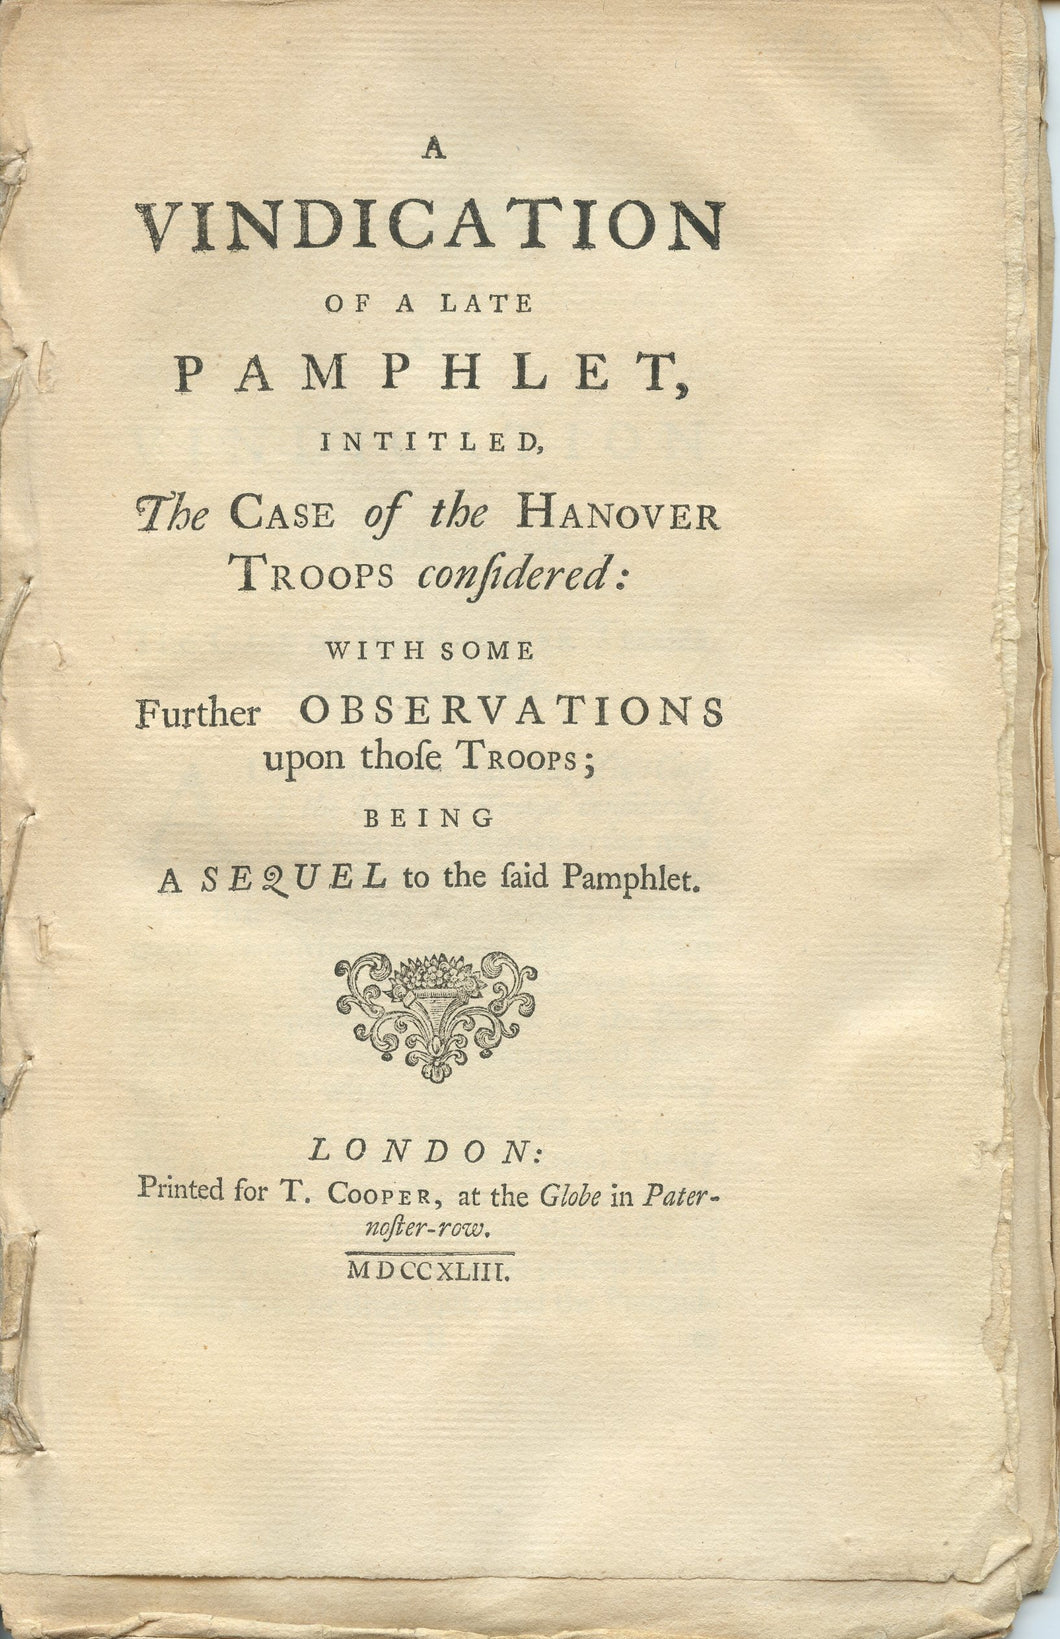 A Vindication of a Late Pamphlet, intitled, The Case of the Hanover Troops considered: With some Further Observations upon those Troops; Being a Sequel to the said Pamphlet